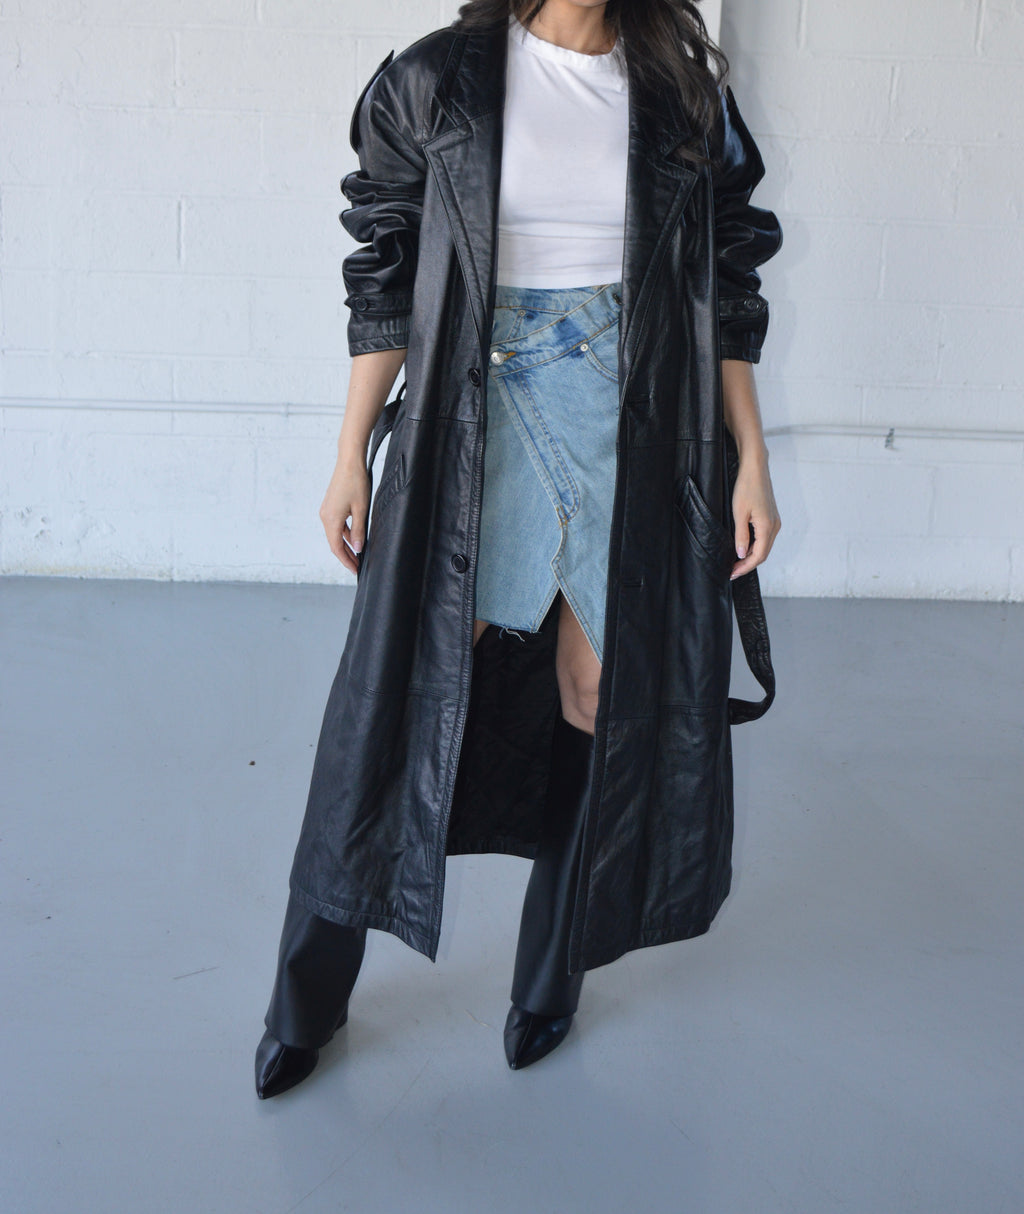 BLACK LEATHER TRENCH JACKET - SIZE XL